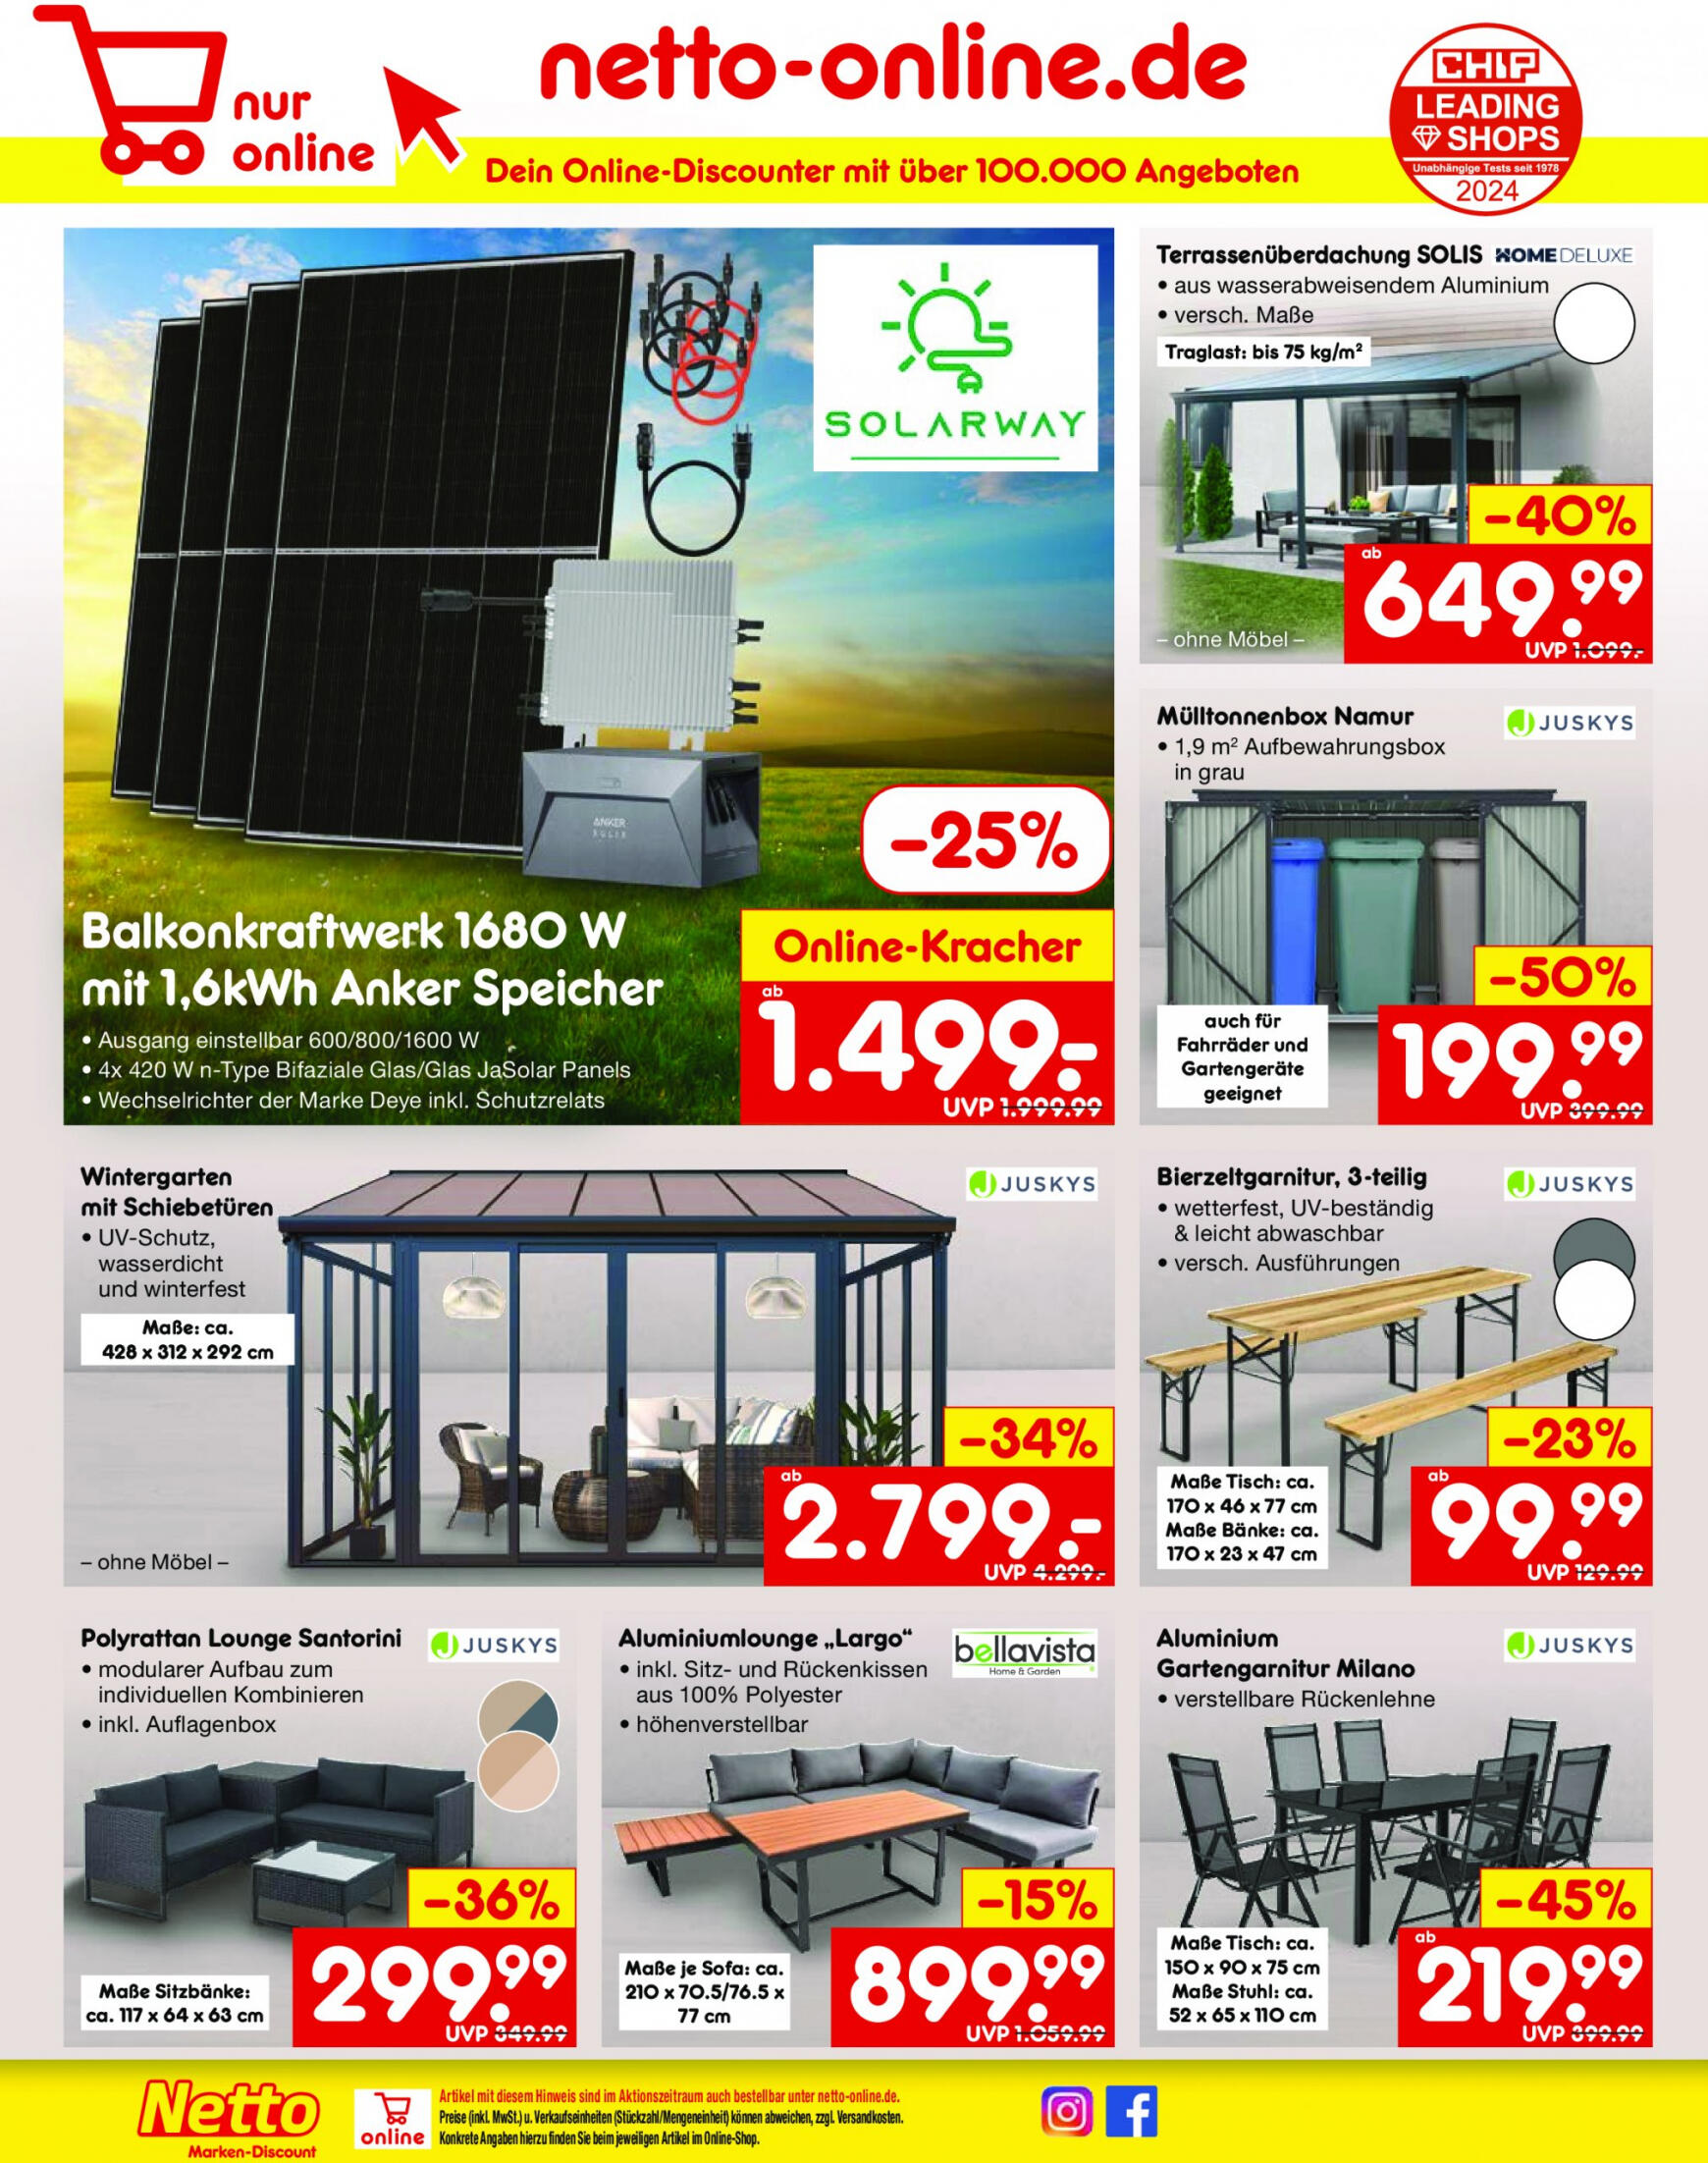 netto - Flyer Netto aktuell 22.04. - 27.04. - page: 36